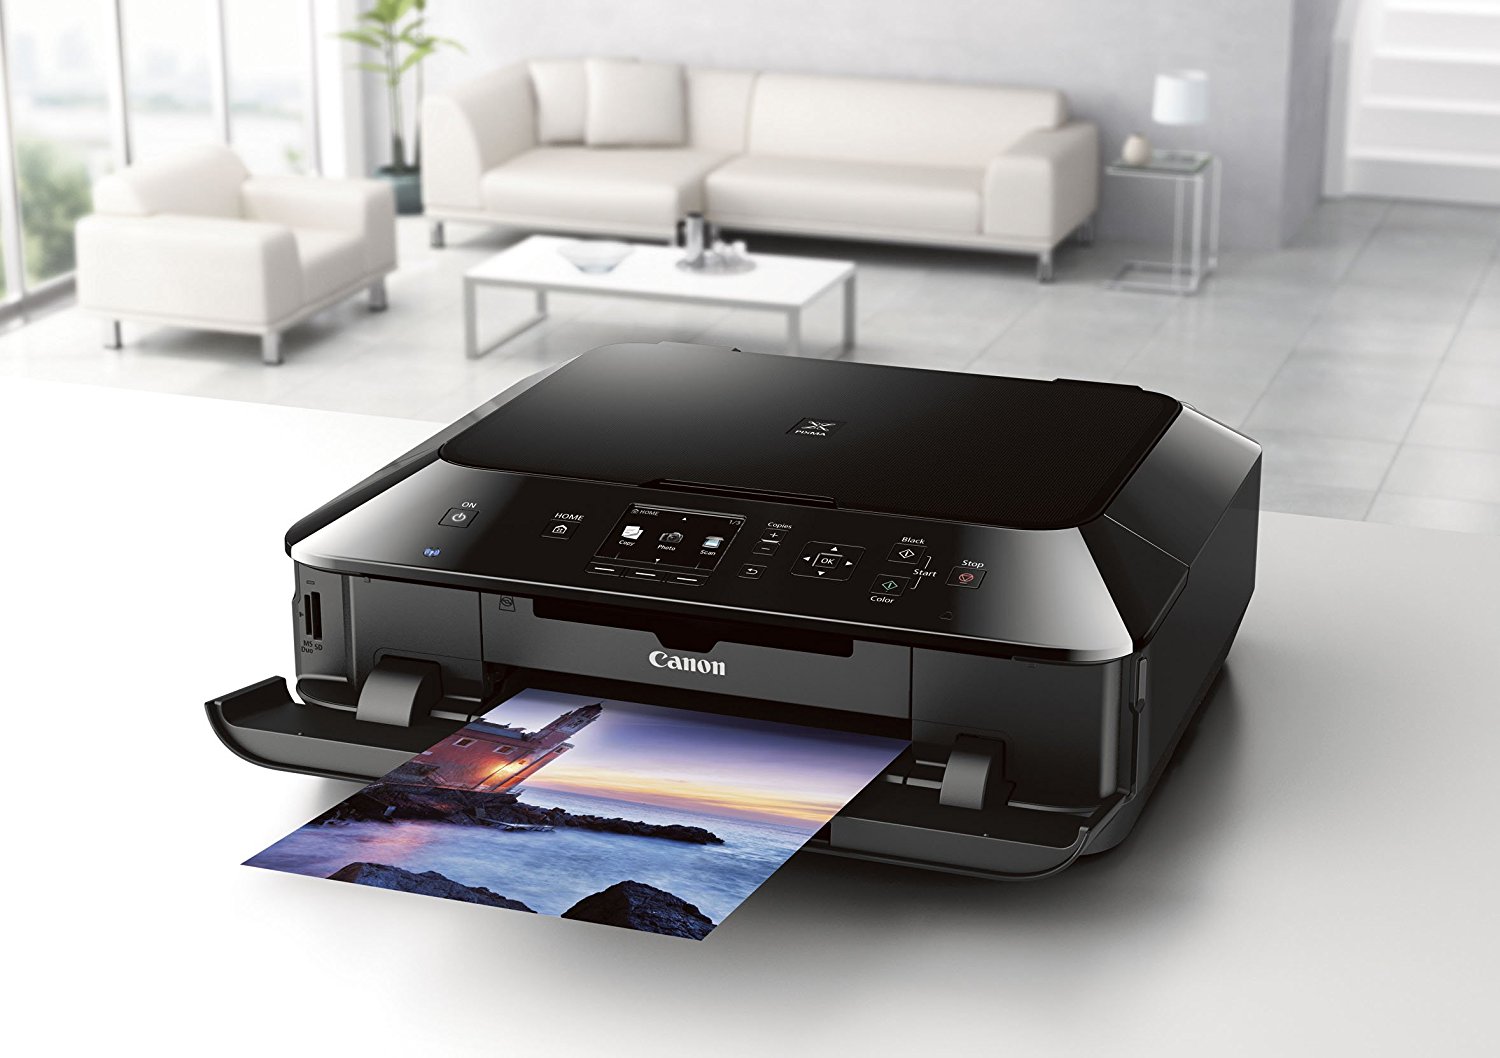 Canon Pixma Mg5420 Wireless Color Photo Printer Discontinued By Manufacturer N3 Free Image 8947